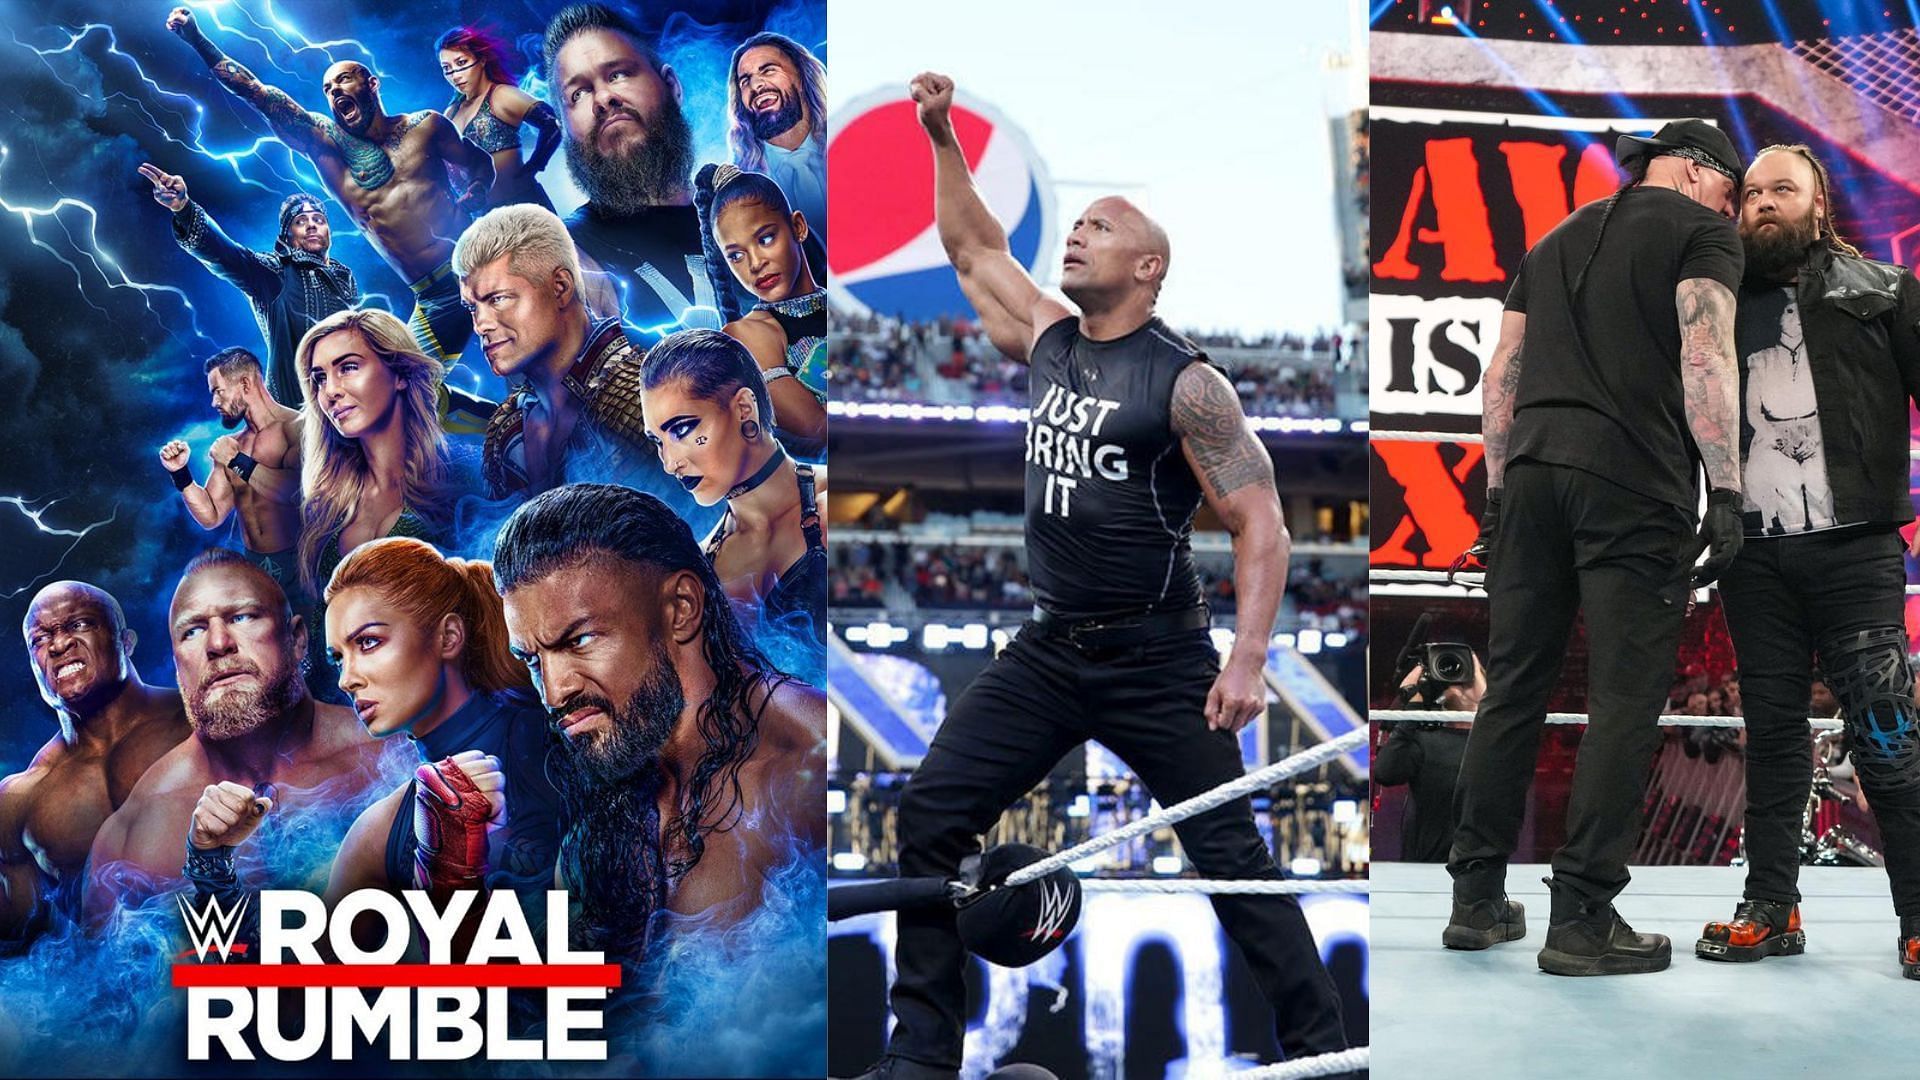 WWE Royal Rumble 2023 will be one for the ages!